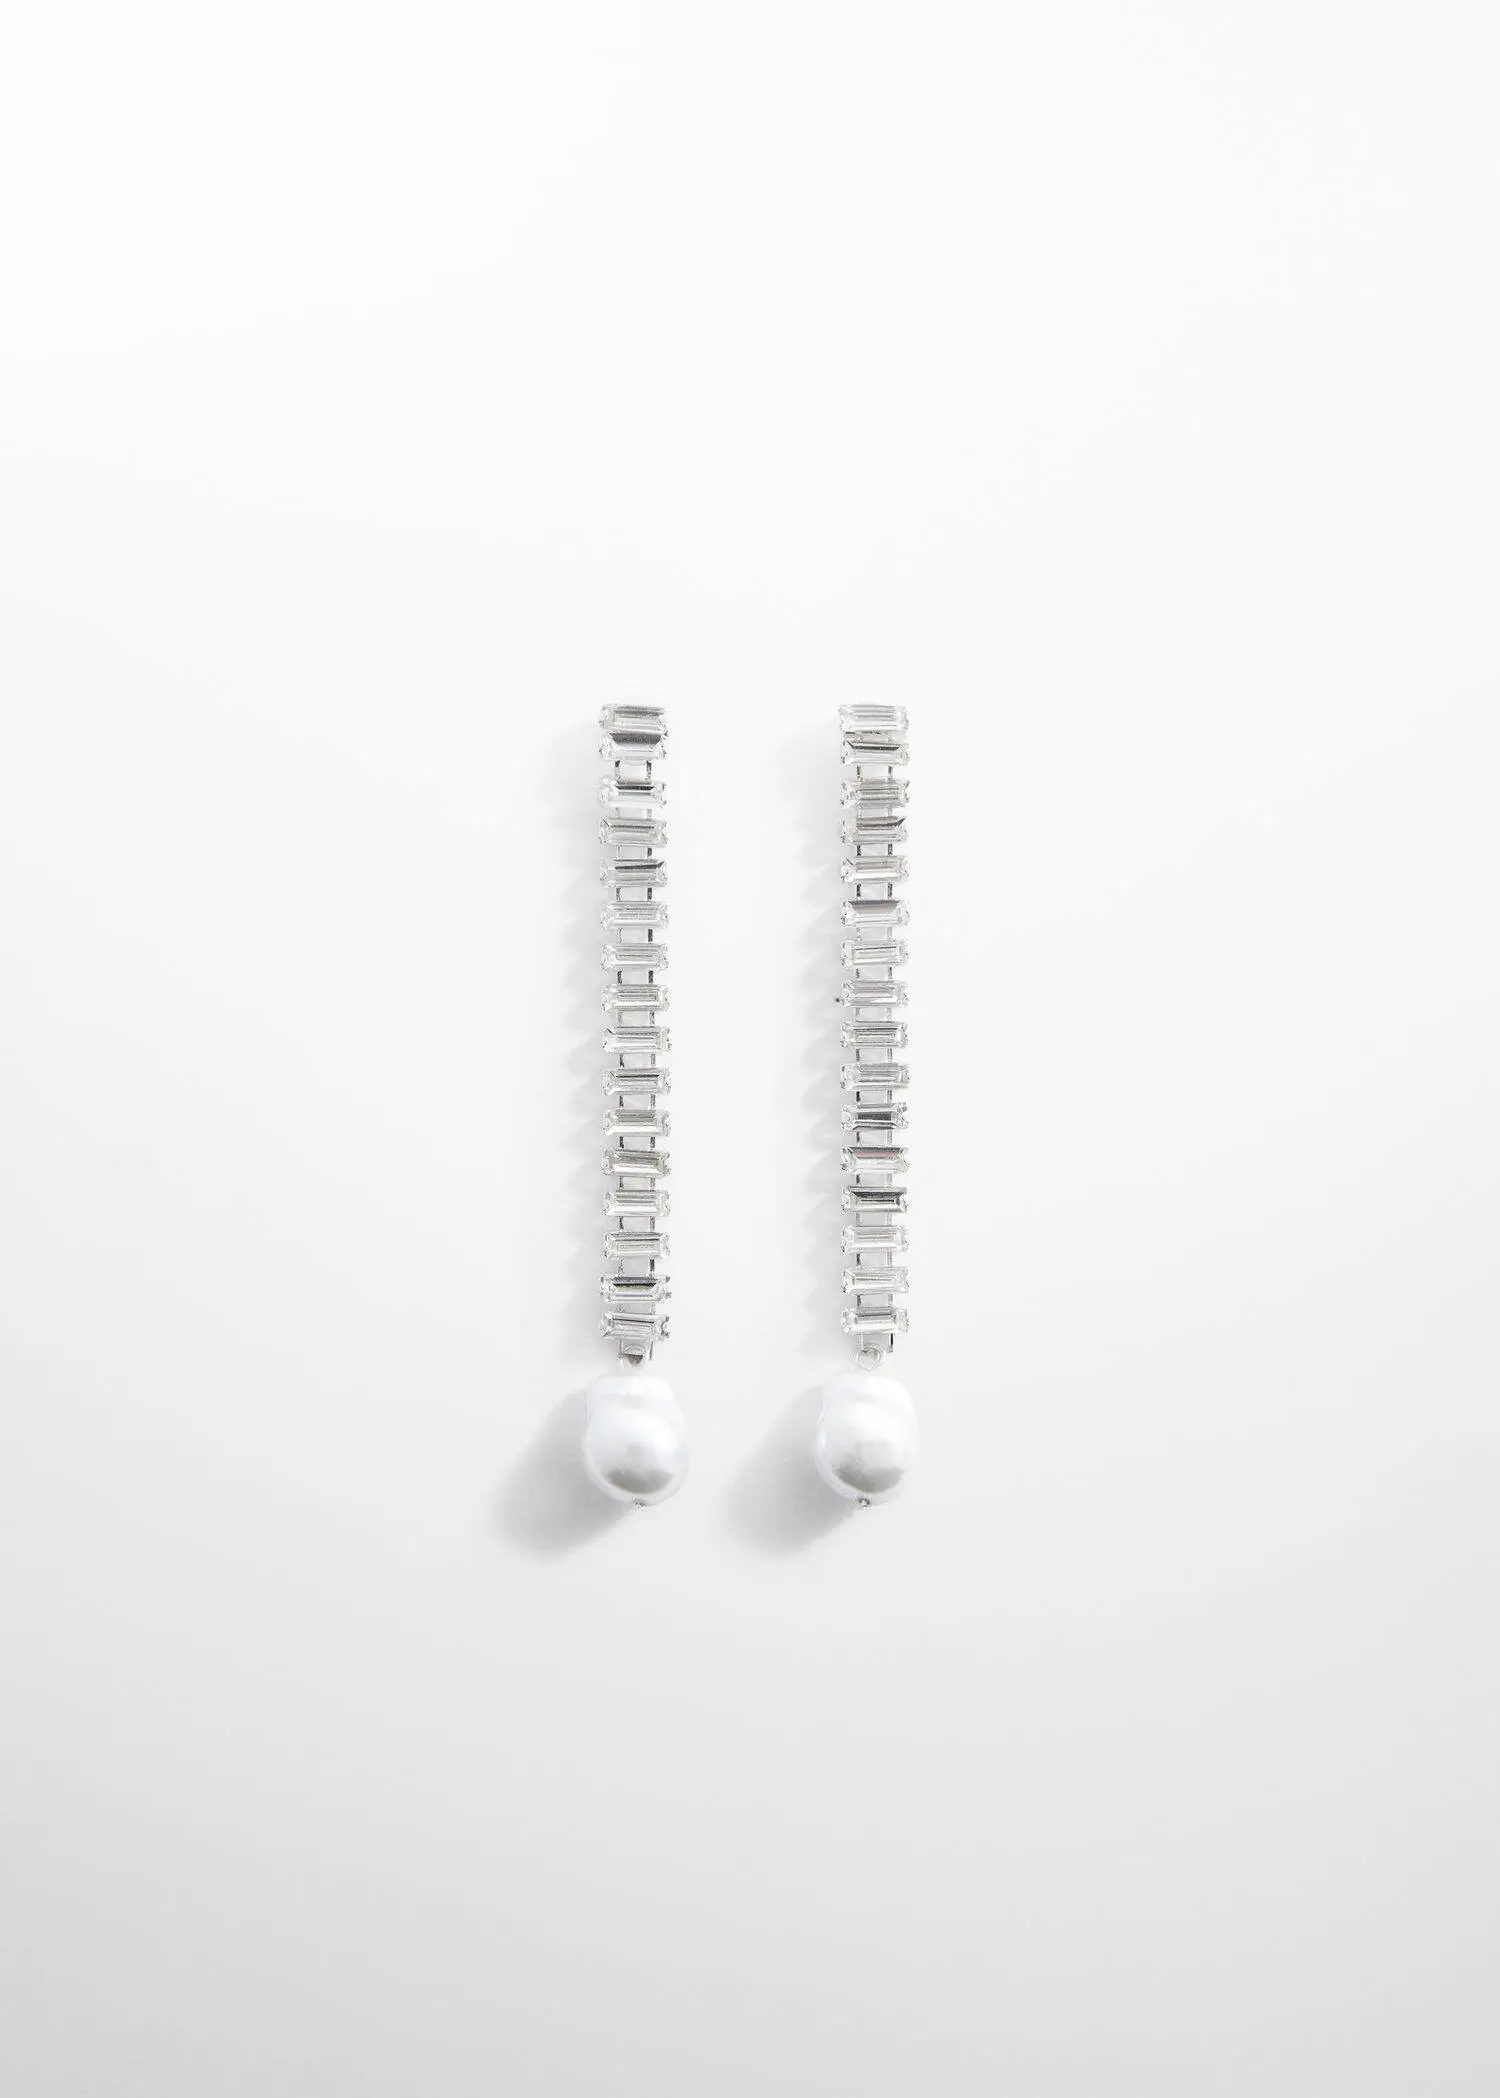 Mango Long pearl earrings. a pair of long white earrings on top of a white surface. 